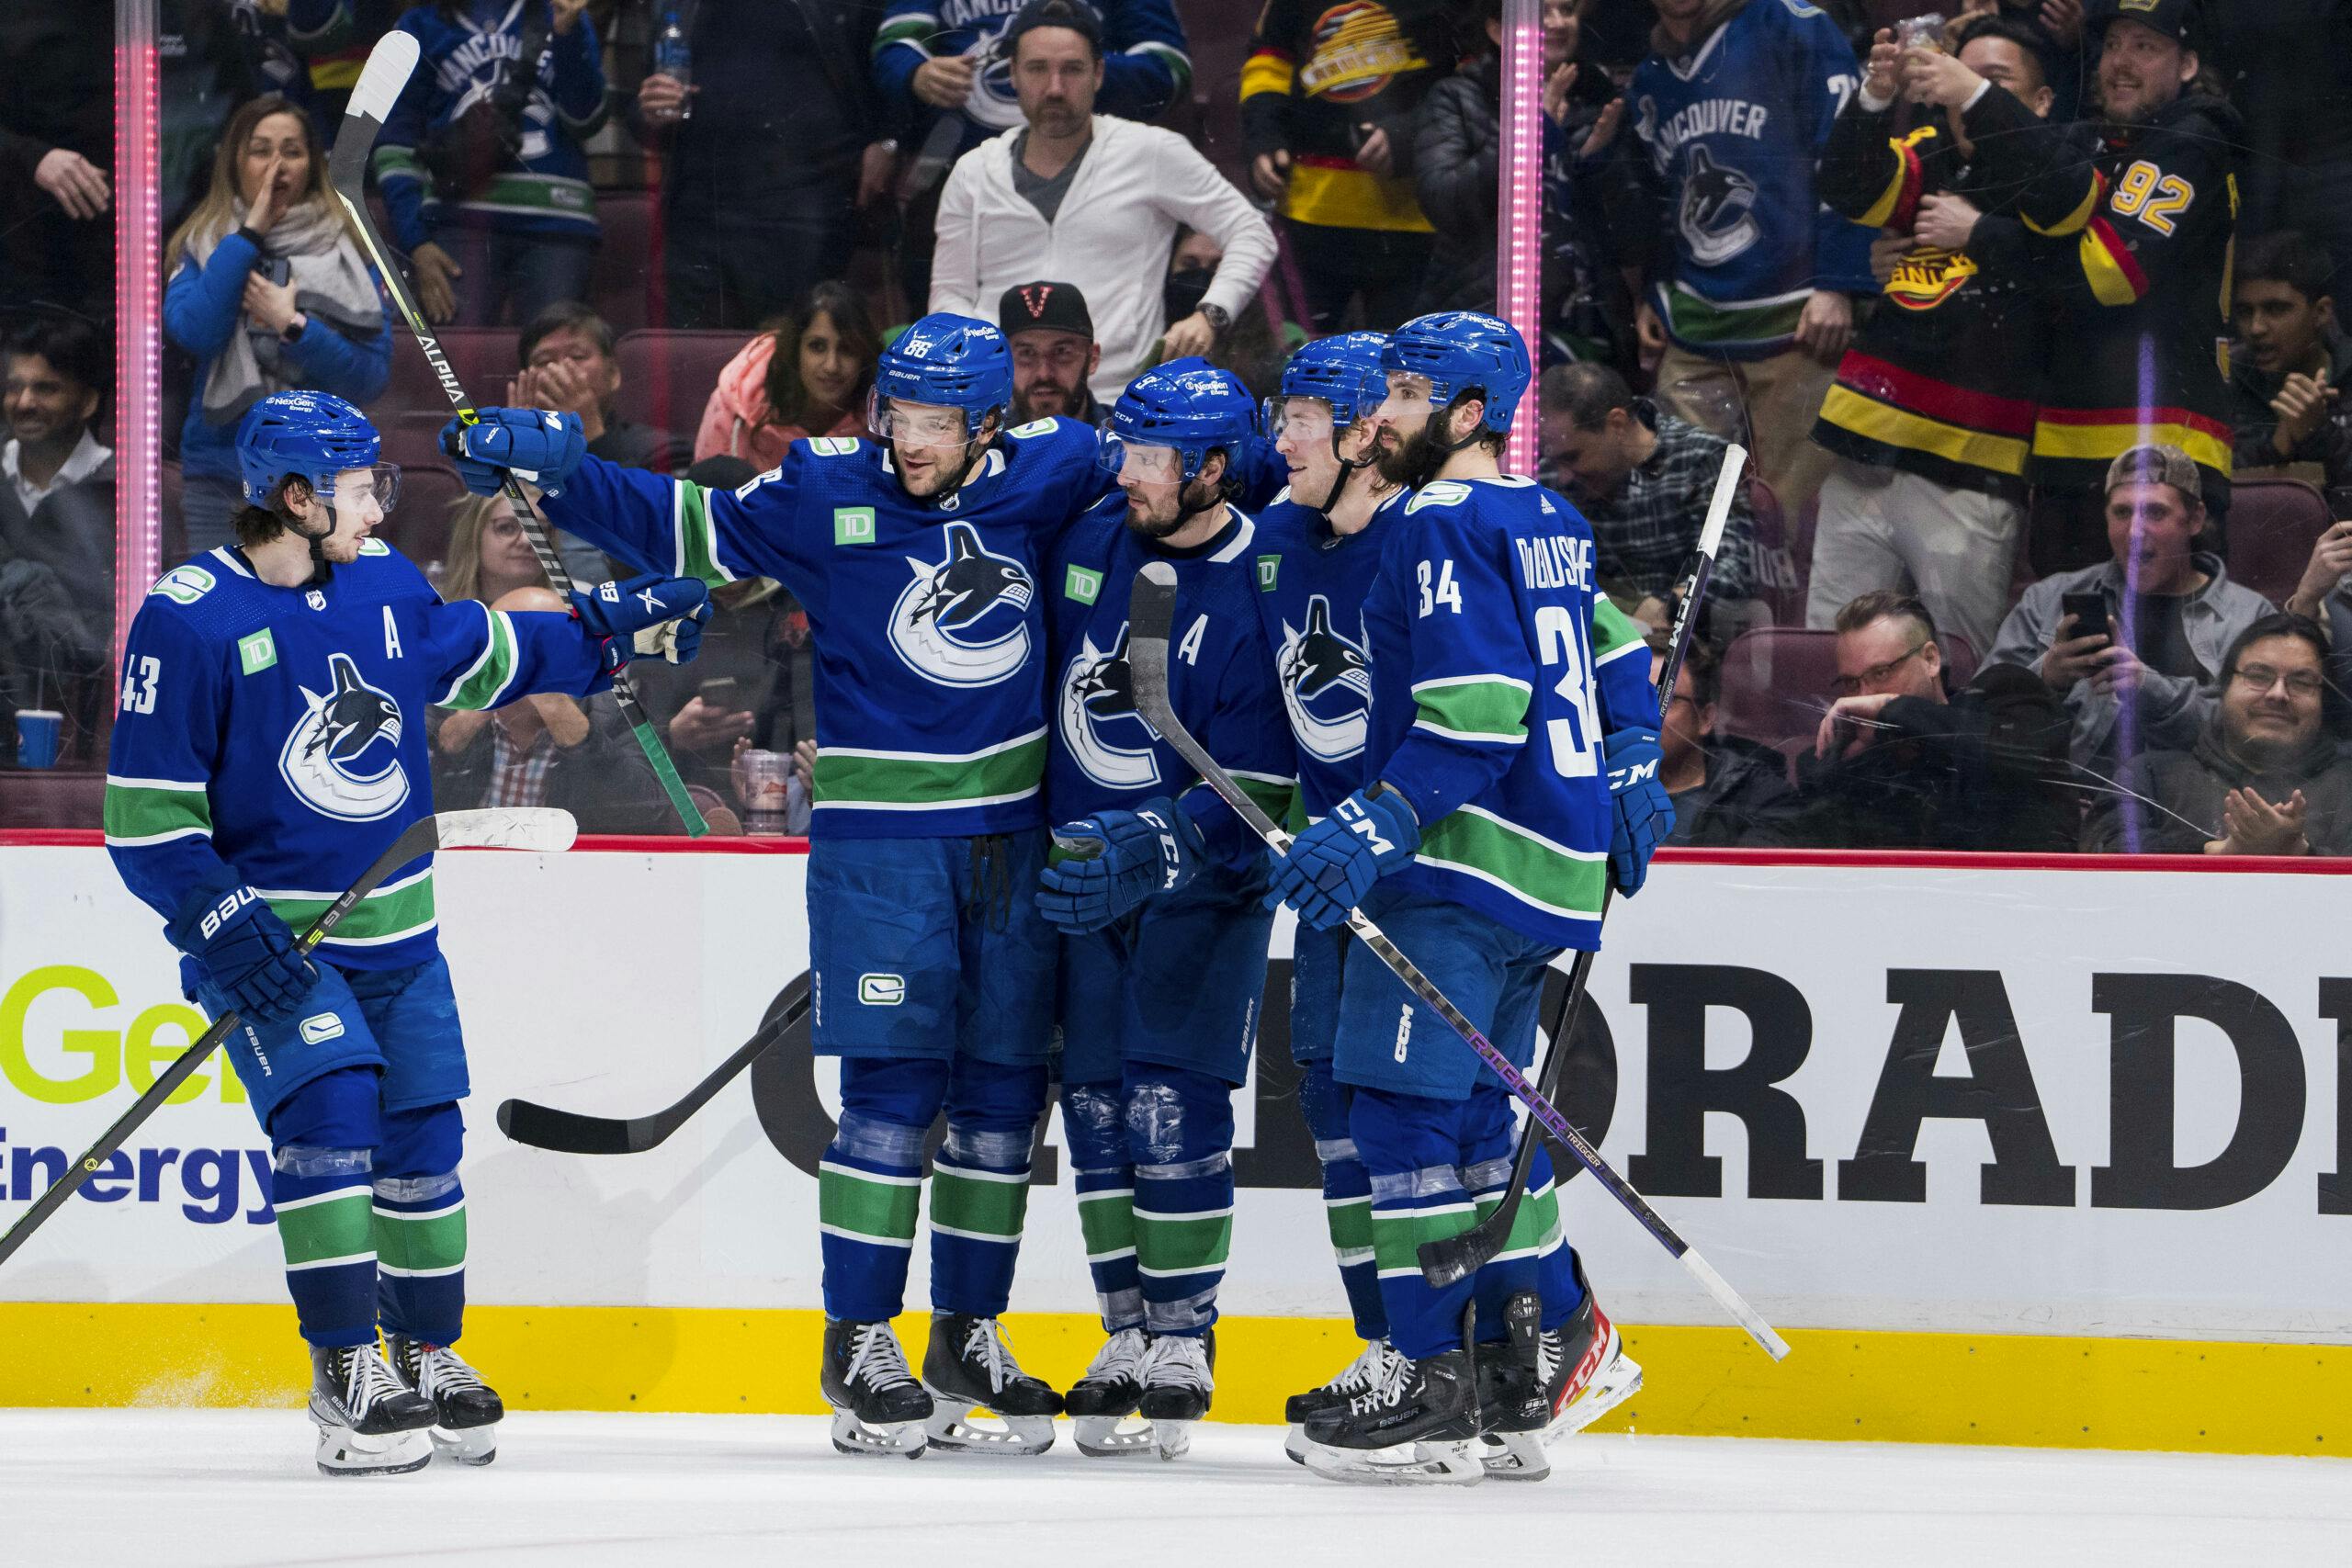 Vancouver Canucks: Where is Alexander Mogilny now? - Page 2